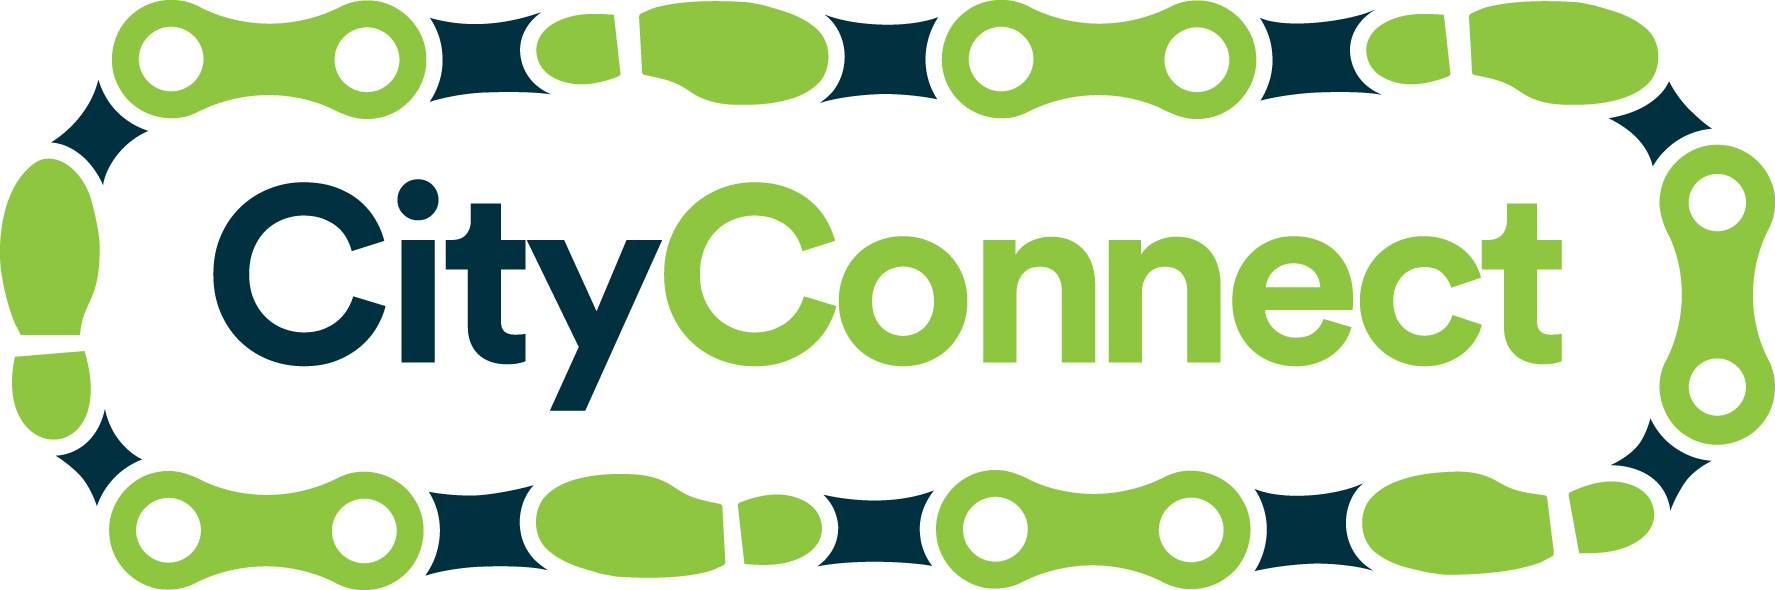 Journey Planner Cityconnect